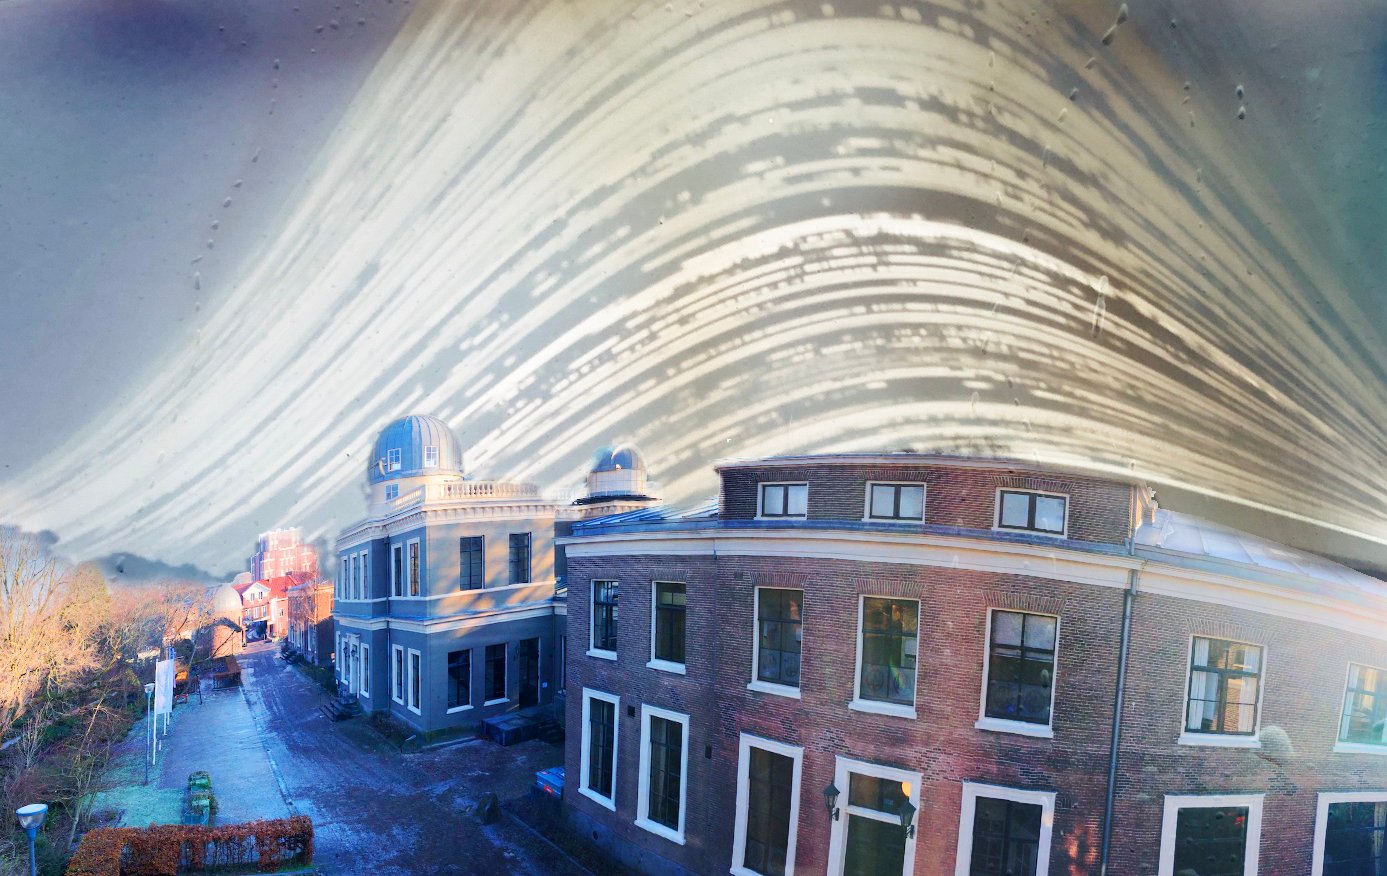 Composite of a pinhole exposure and a daytime panoramic photo of the Old Observatory in Leiden, the Netherlands.